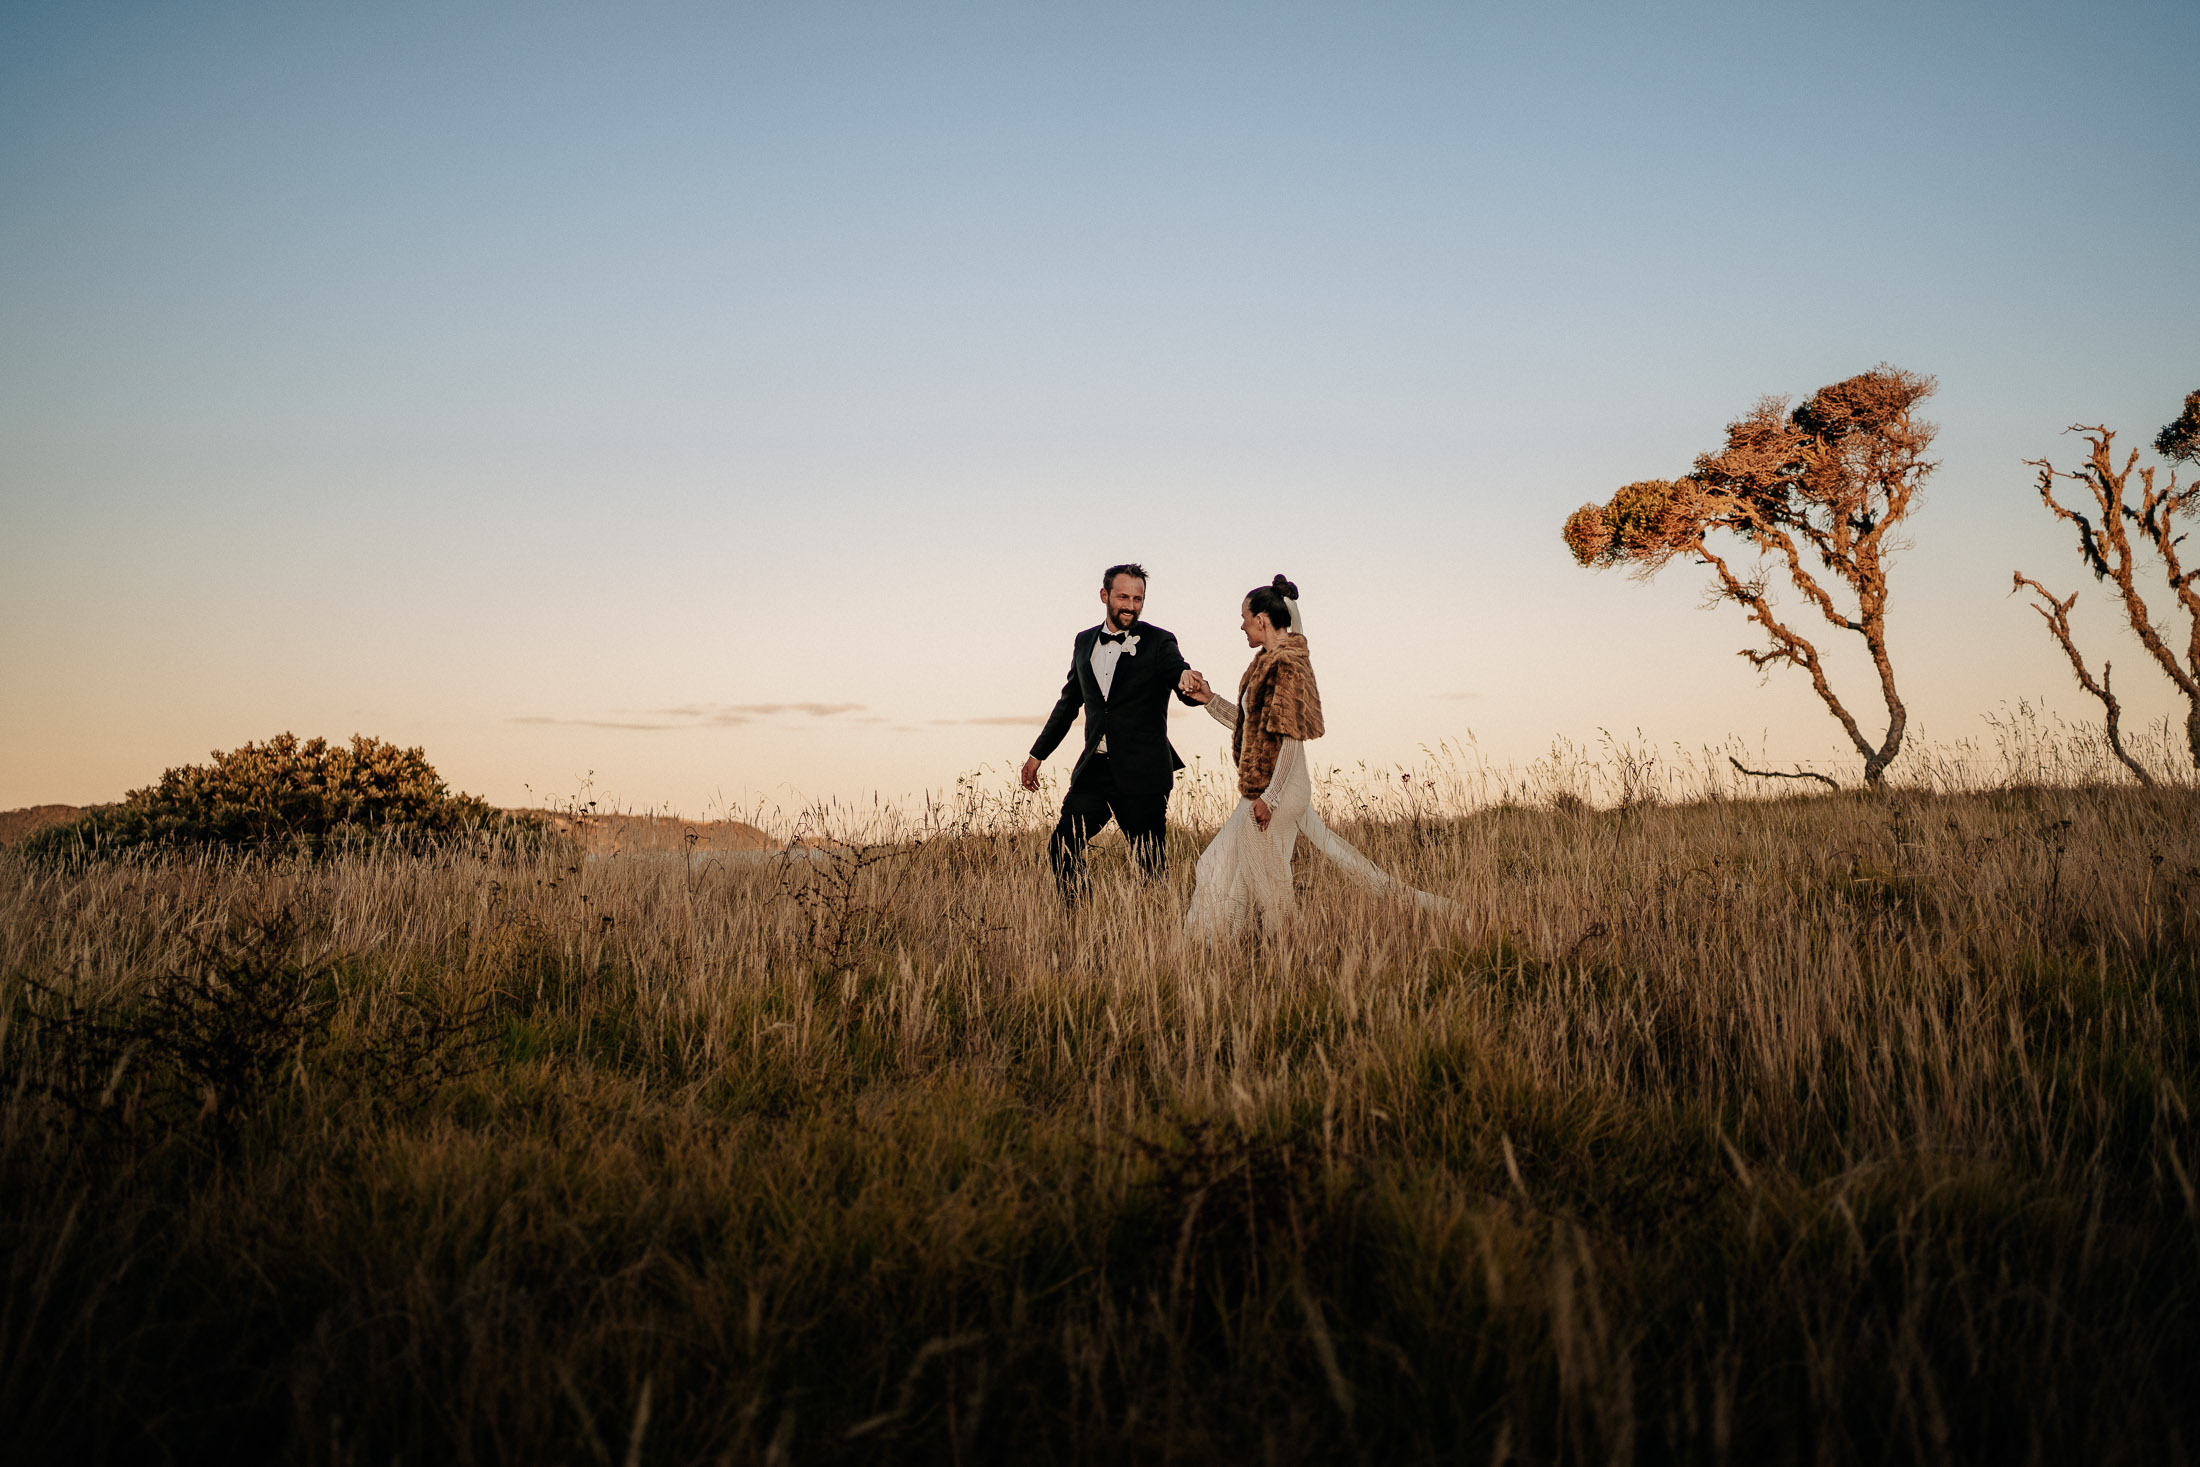 Northland wedding photography with Jess Burges